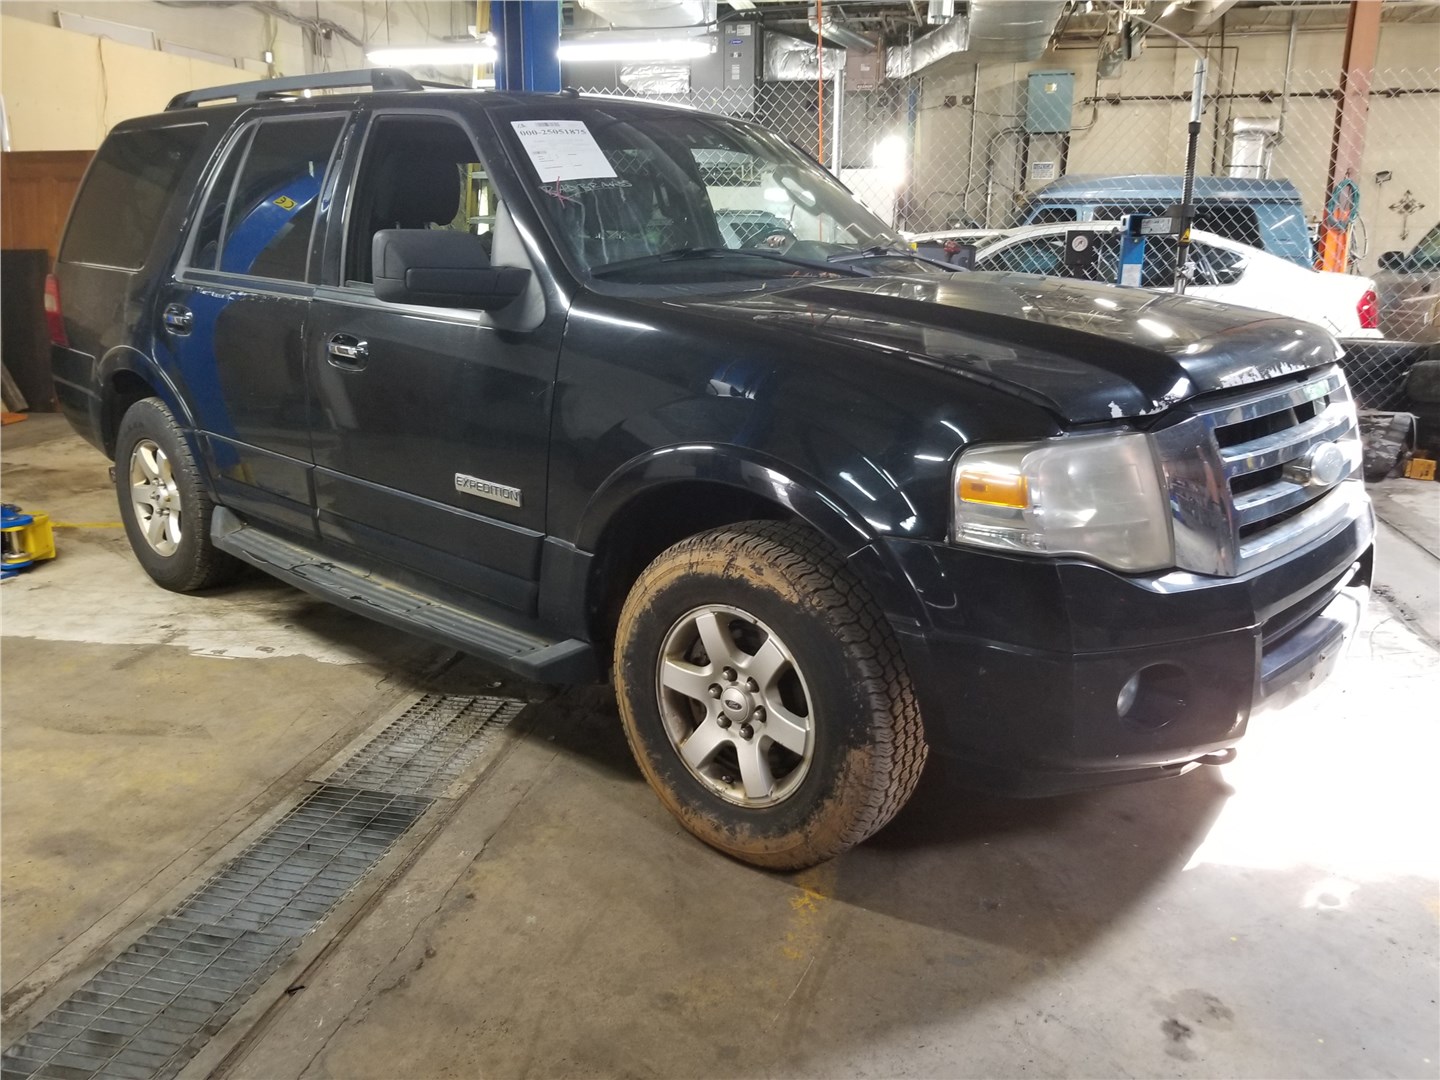 7L1Z5500AA Рычаг подвески Ford Expedition 2006-2014 2008